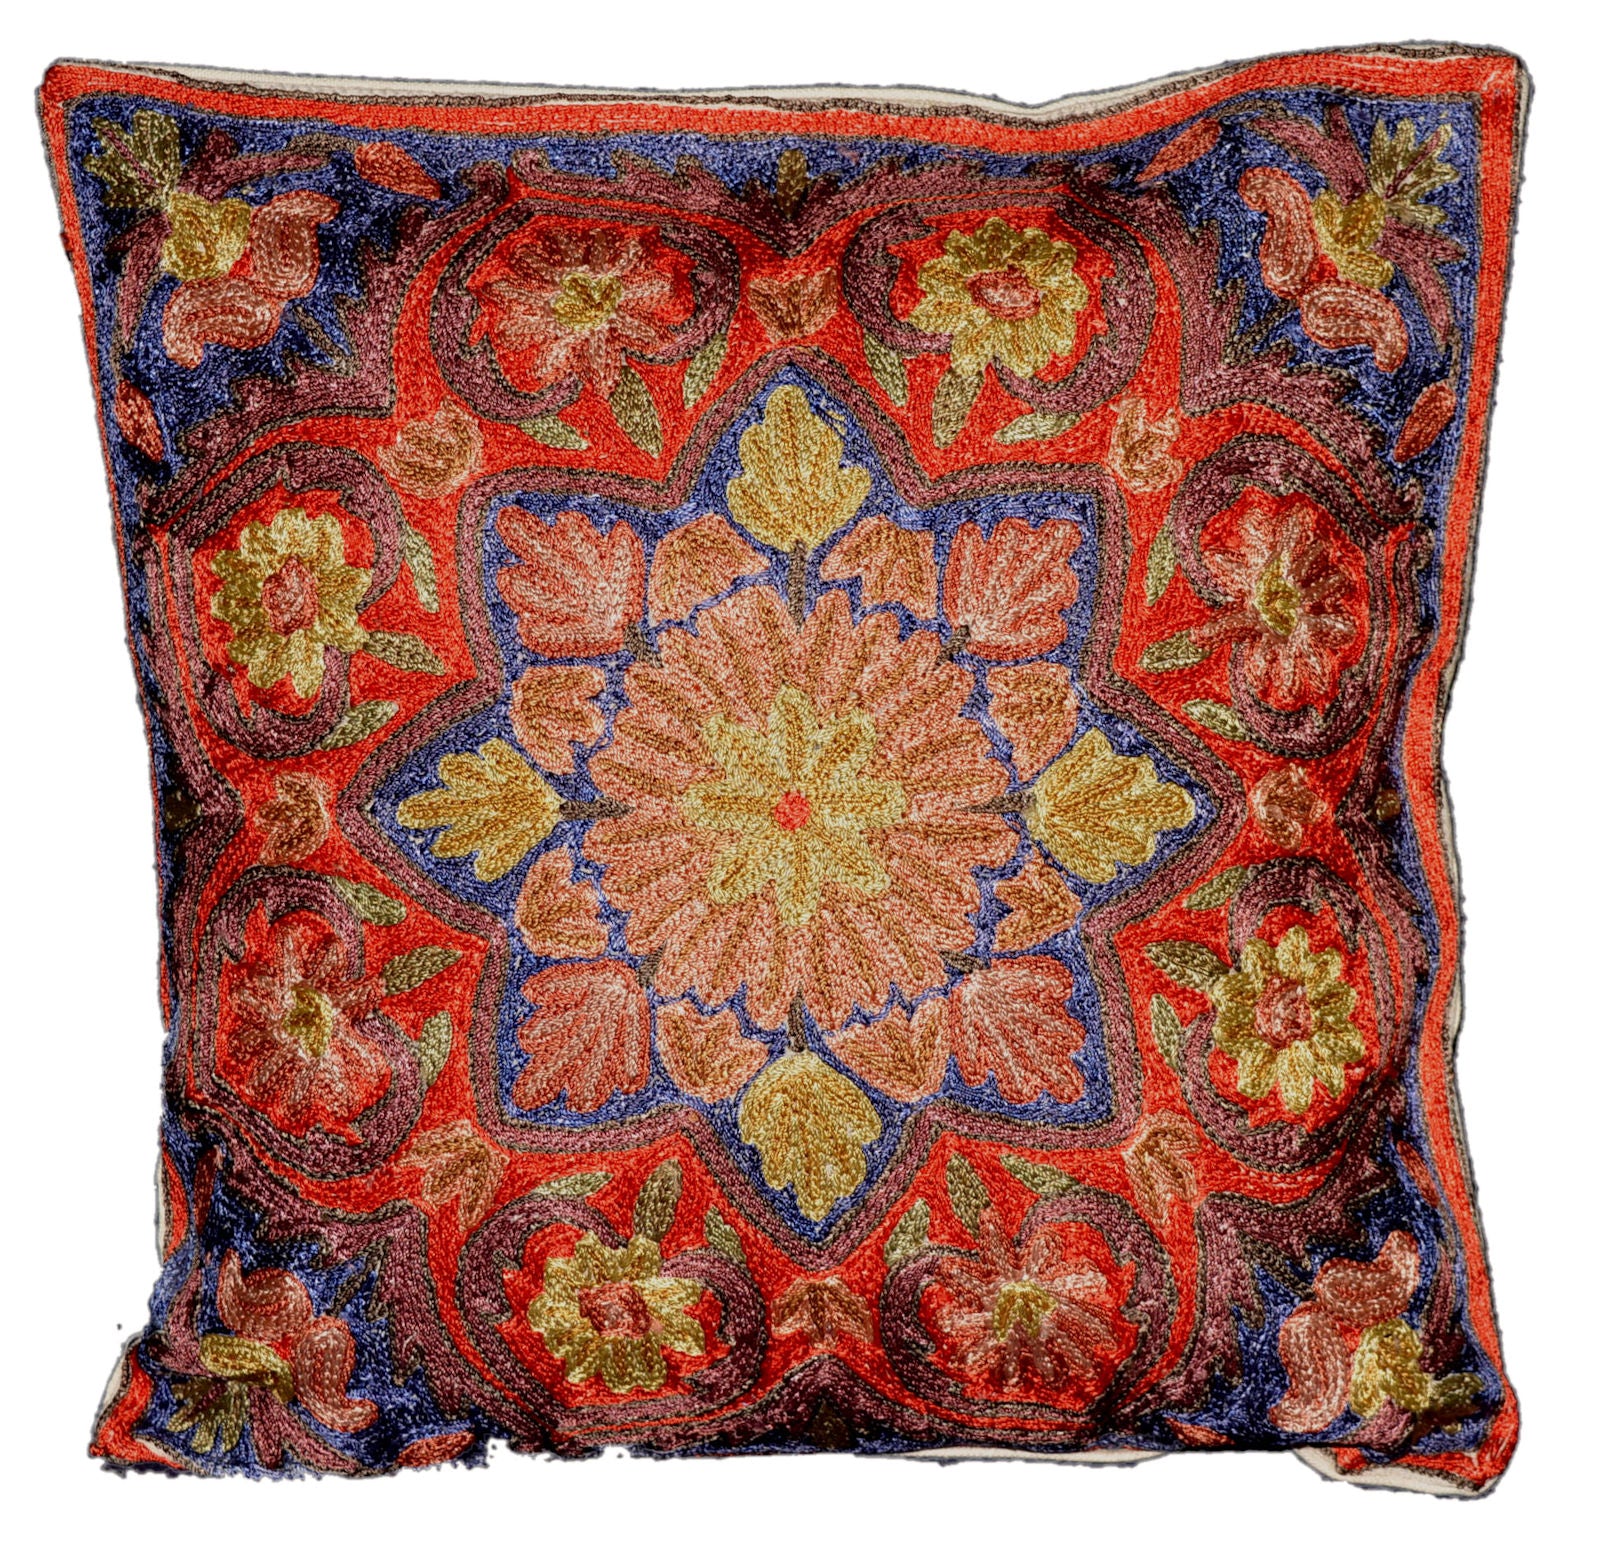 Crewel Silk Embroidered Cushion Throw Pillow Cover, Multicolor #CW2008